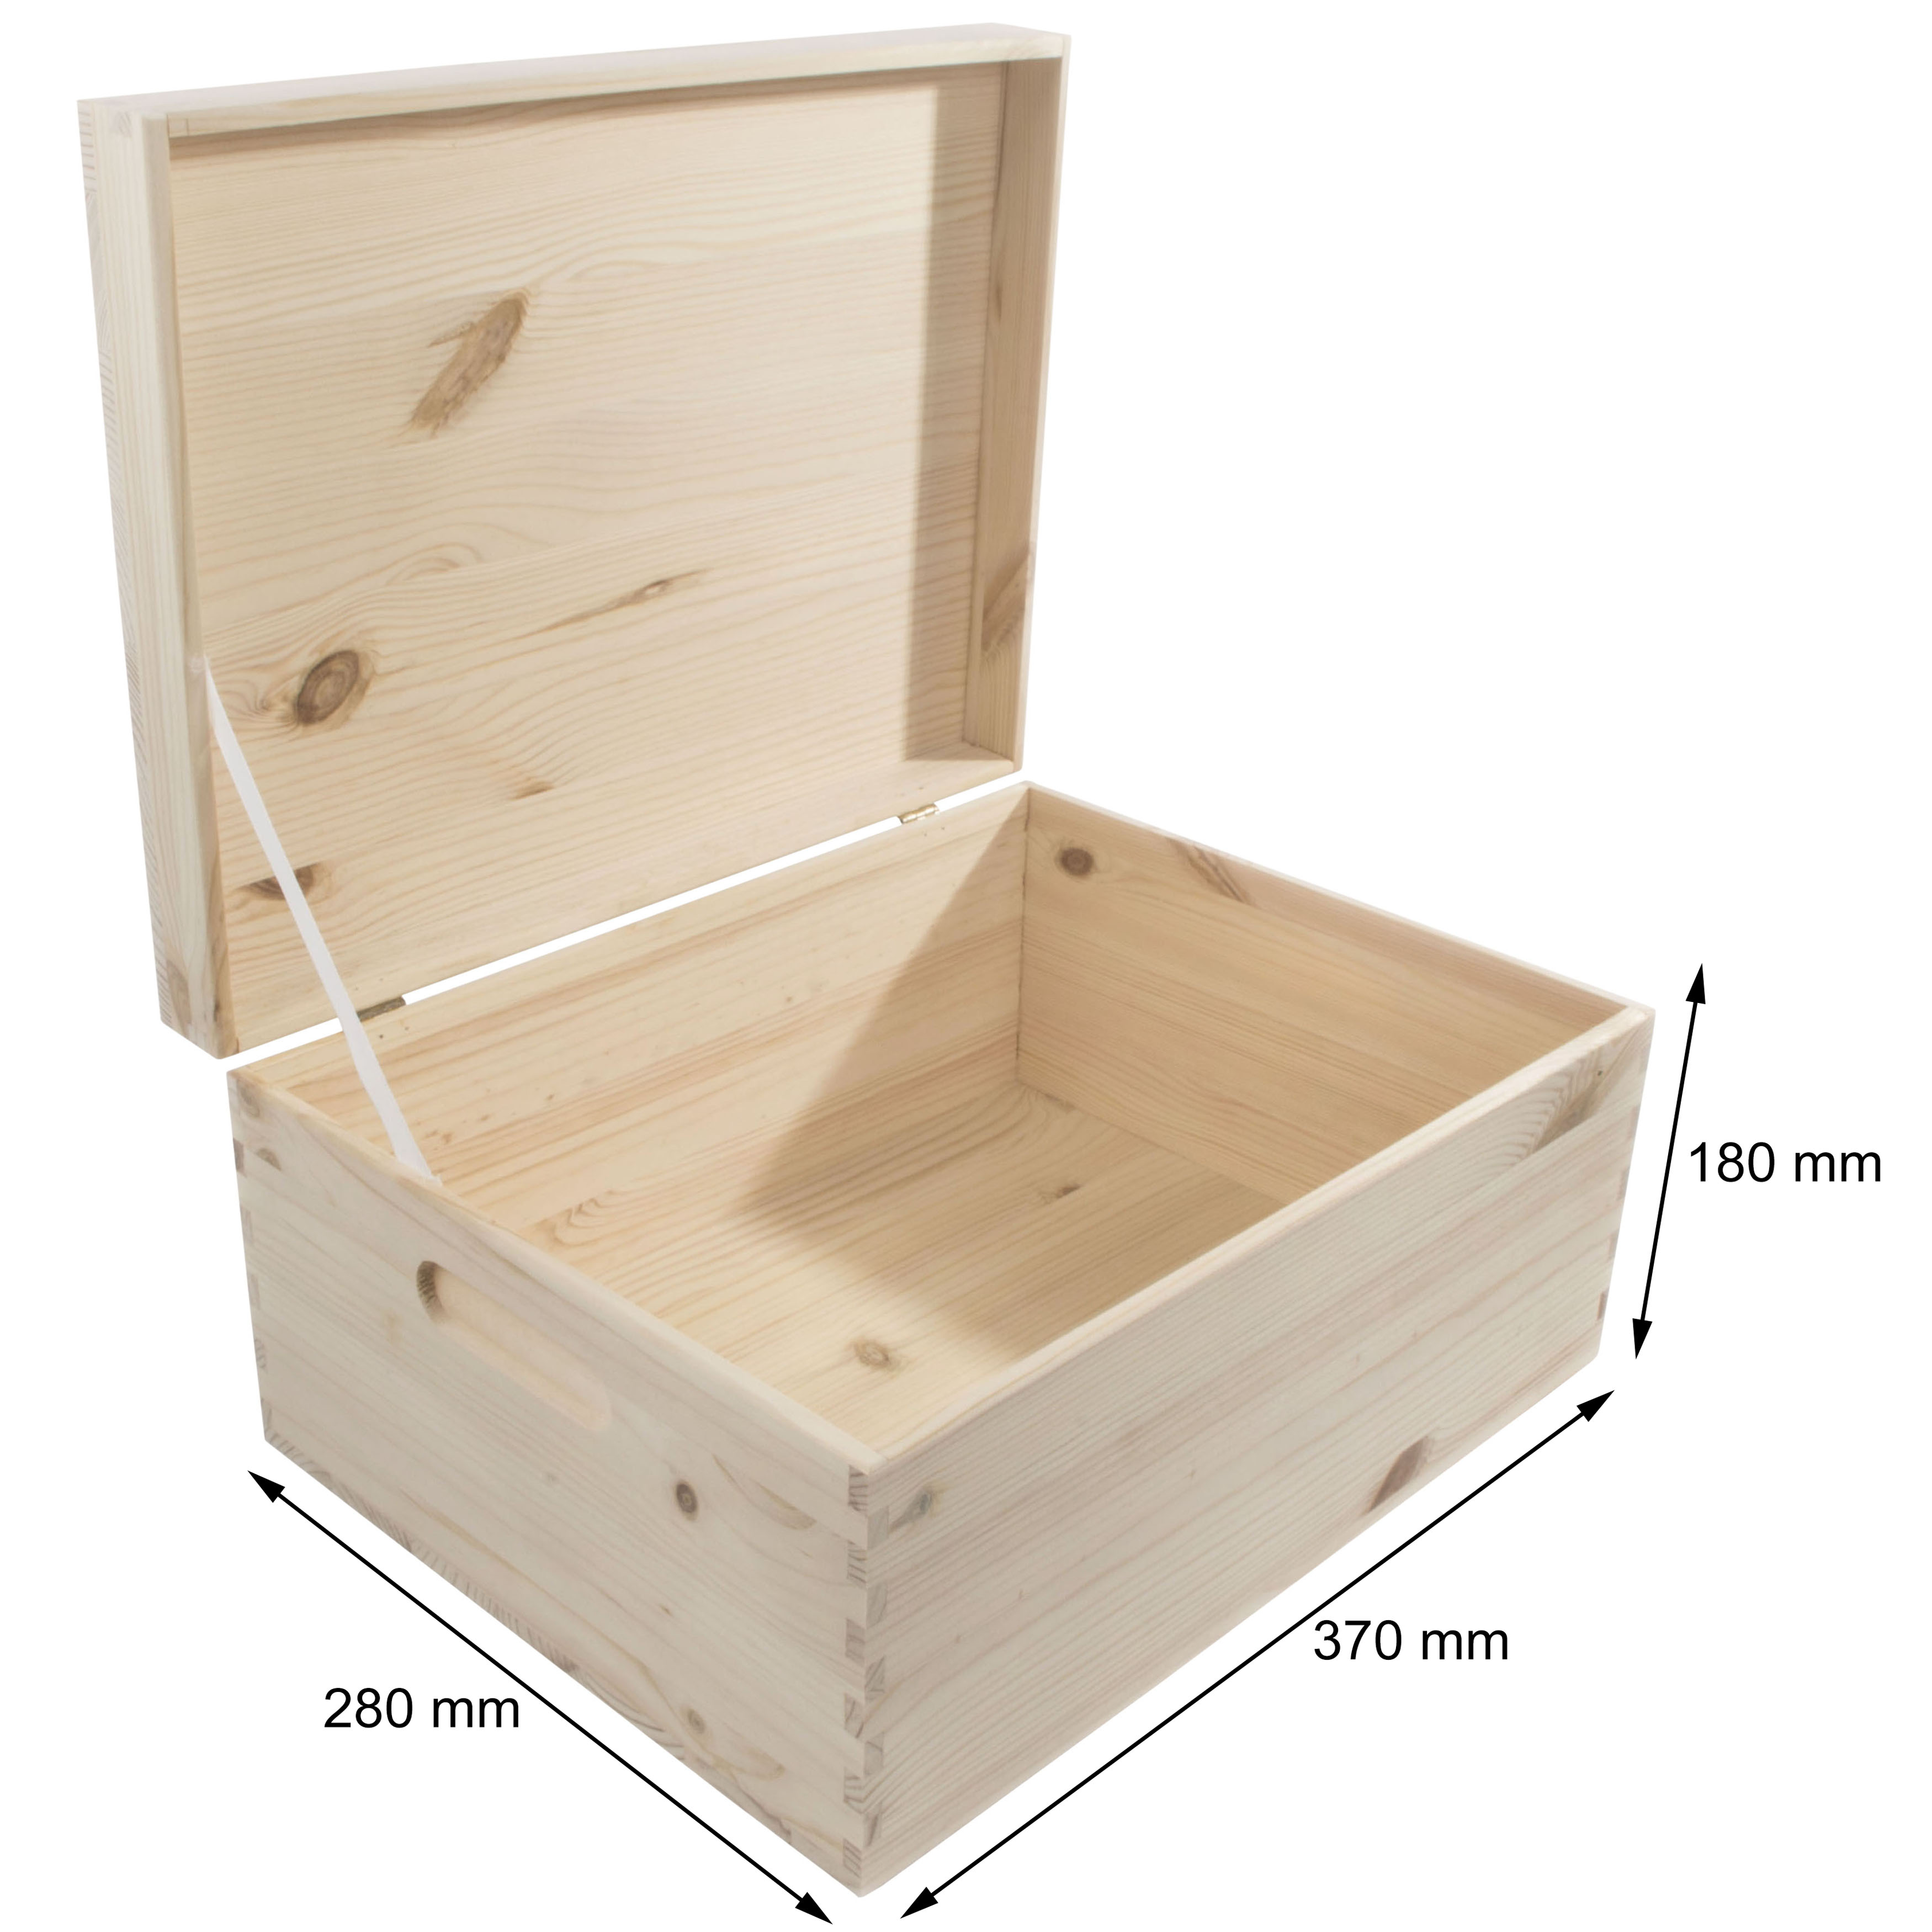 Large+ Rectangular Wooden Storage Box With Lid And Handles 